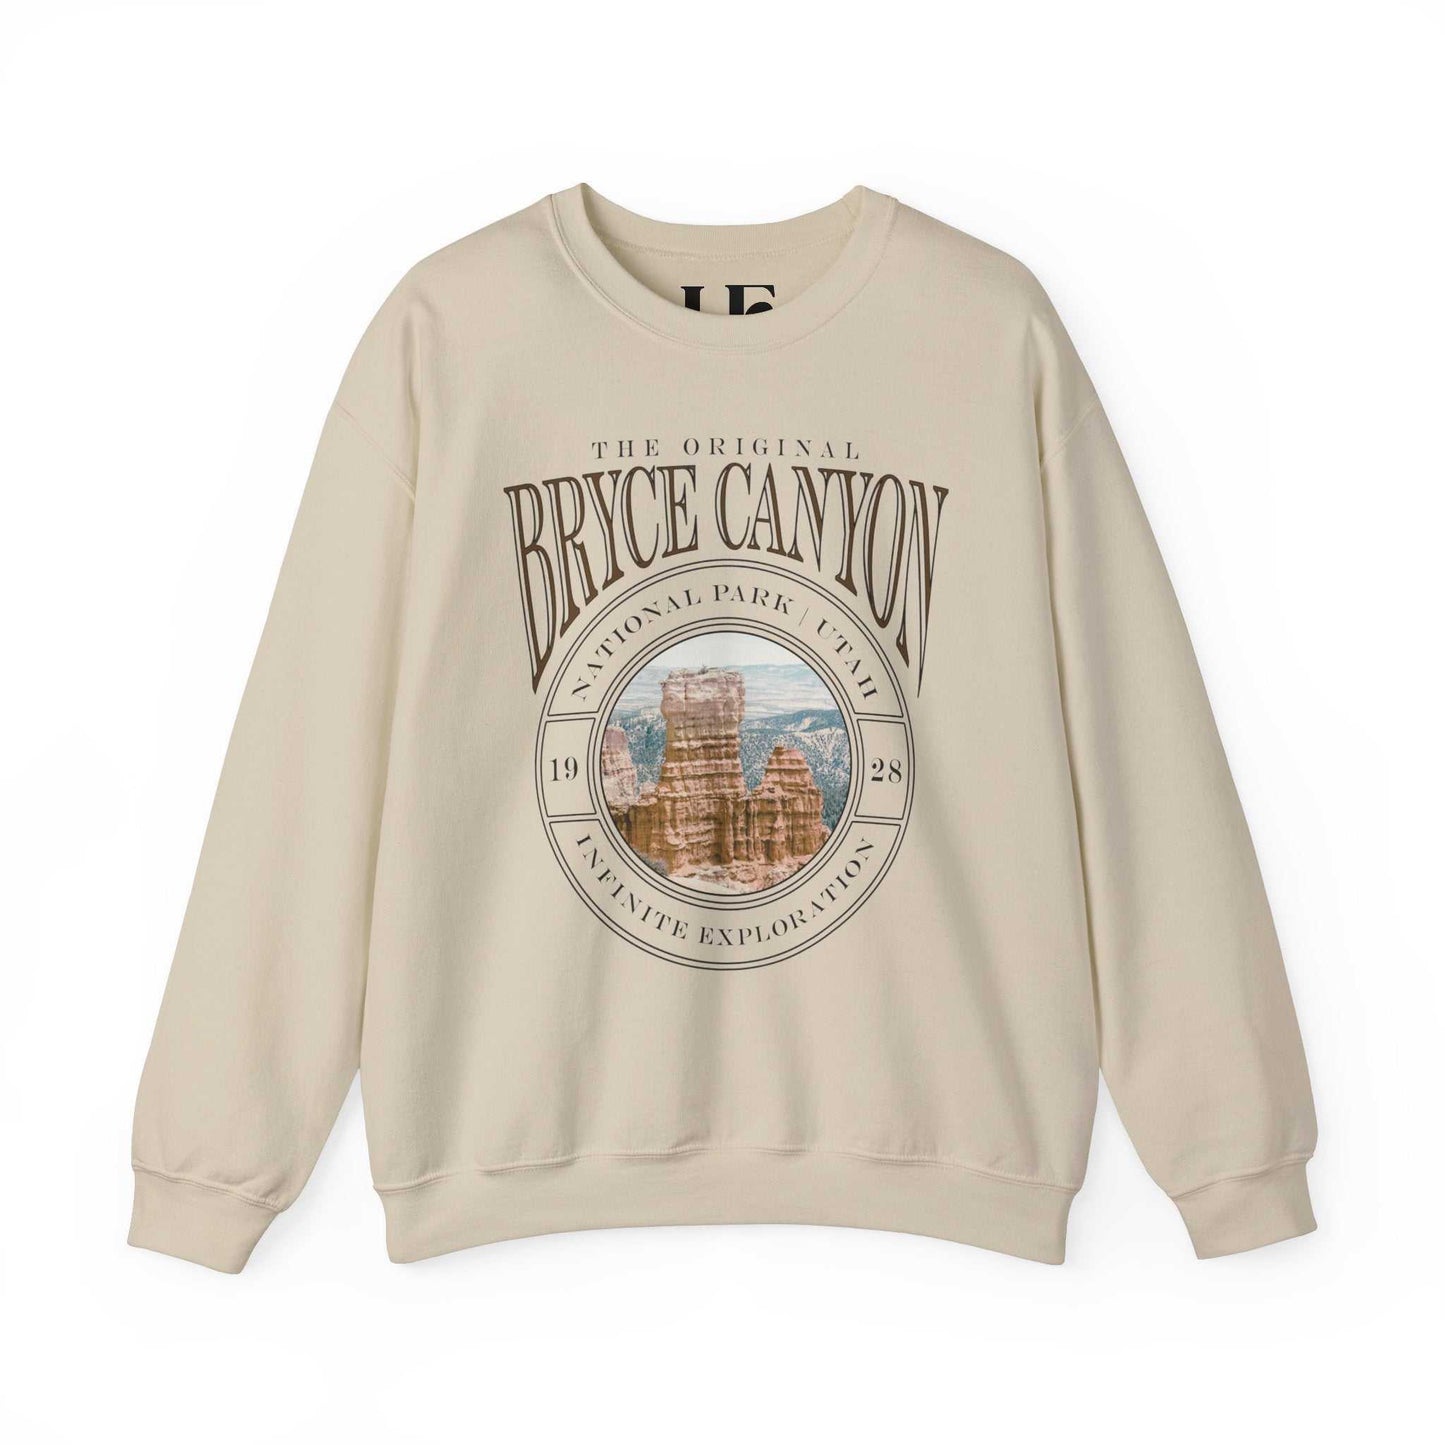 Bryce Canyon SweatshirtA classic Bryce Canyon sweatshirt featuring the the famous hoodoo landscapes. 
Details:
- Medium-heavy fabric for staying cozy - sizing is unisex - Go up two sizes f